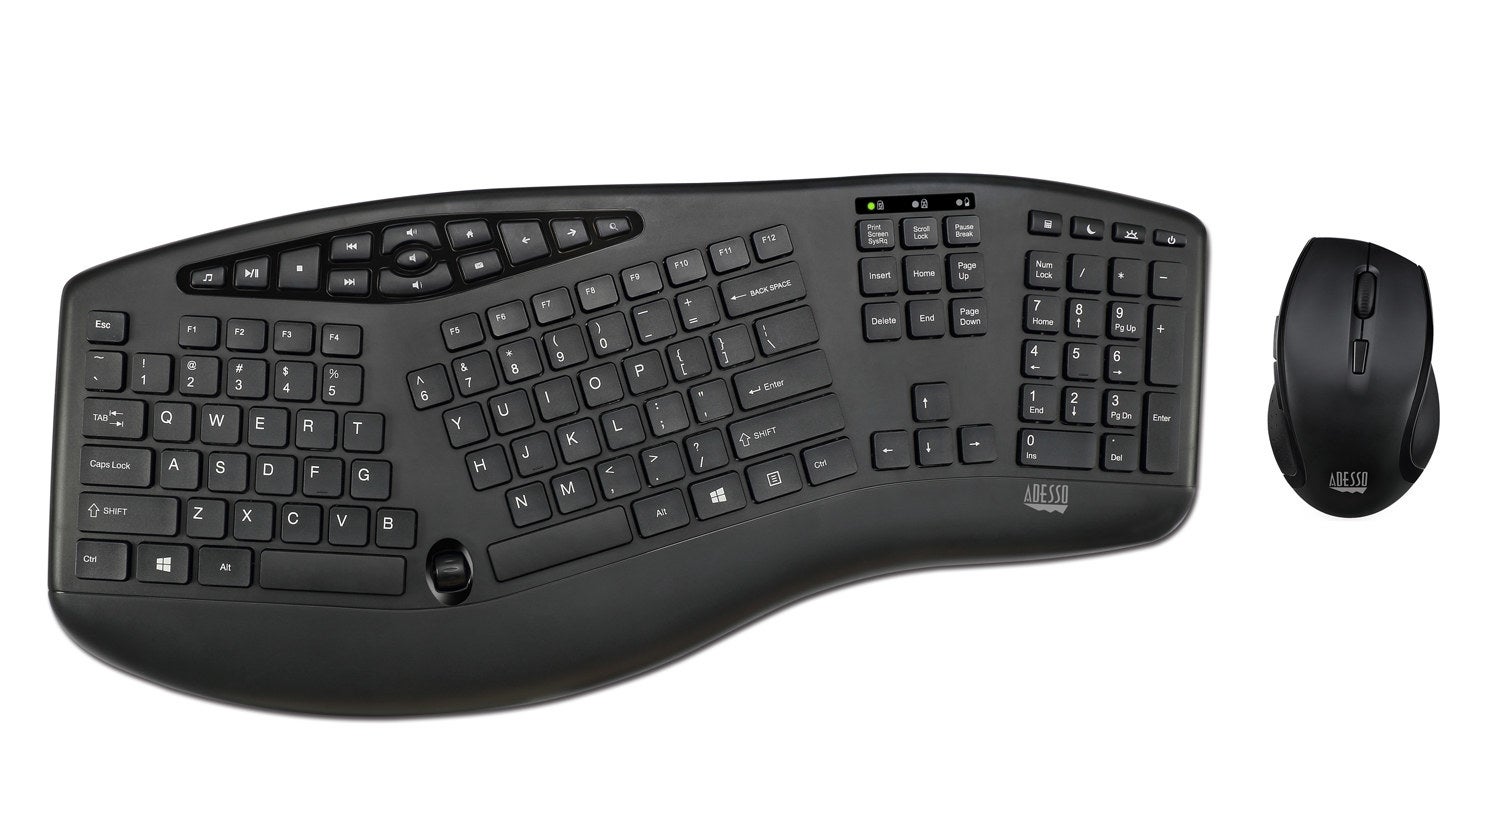 the keyboard and mouse